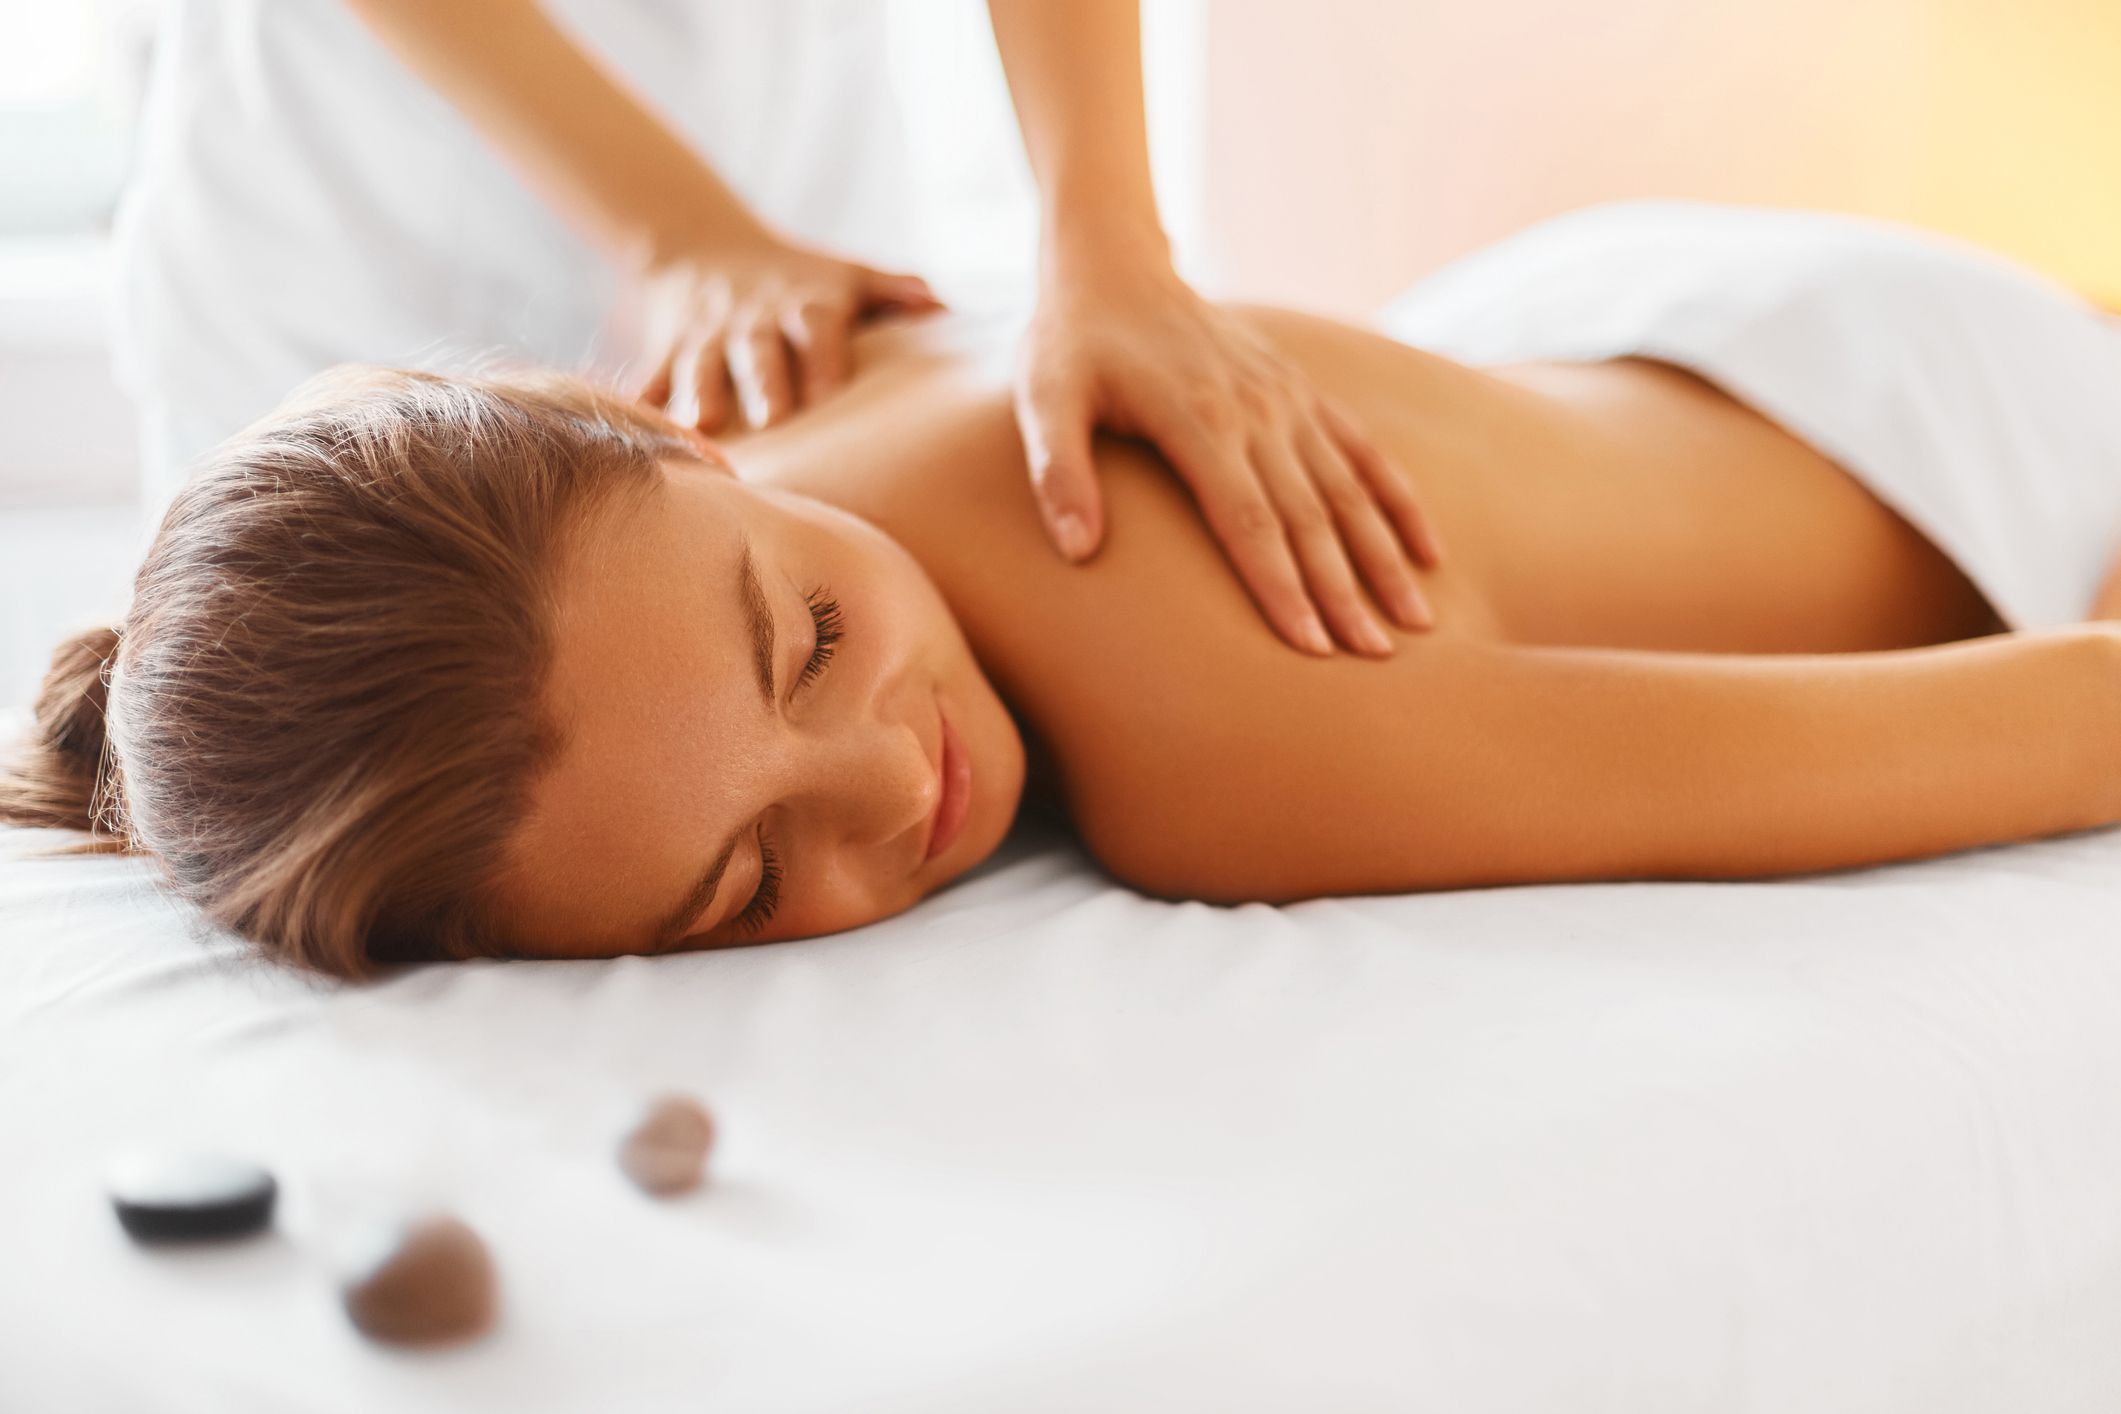 What's the Best Way to Get a Healthy Massage? 1